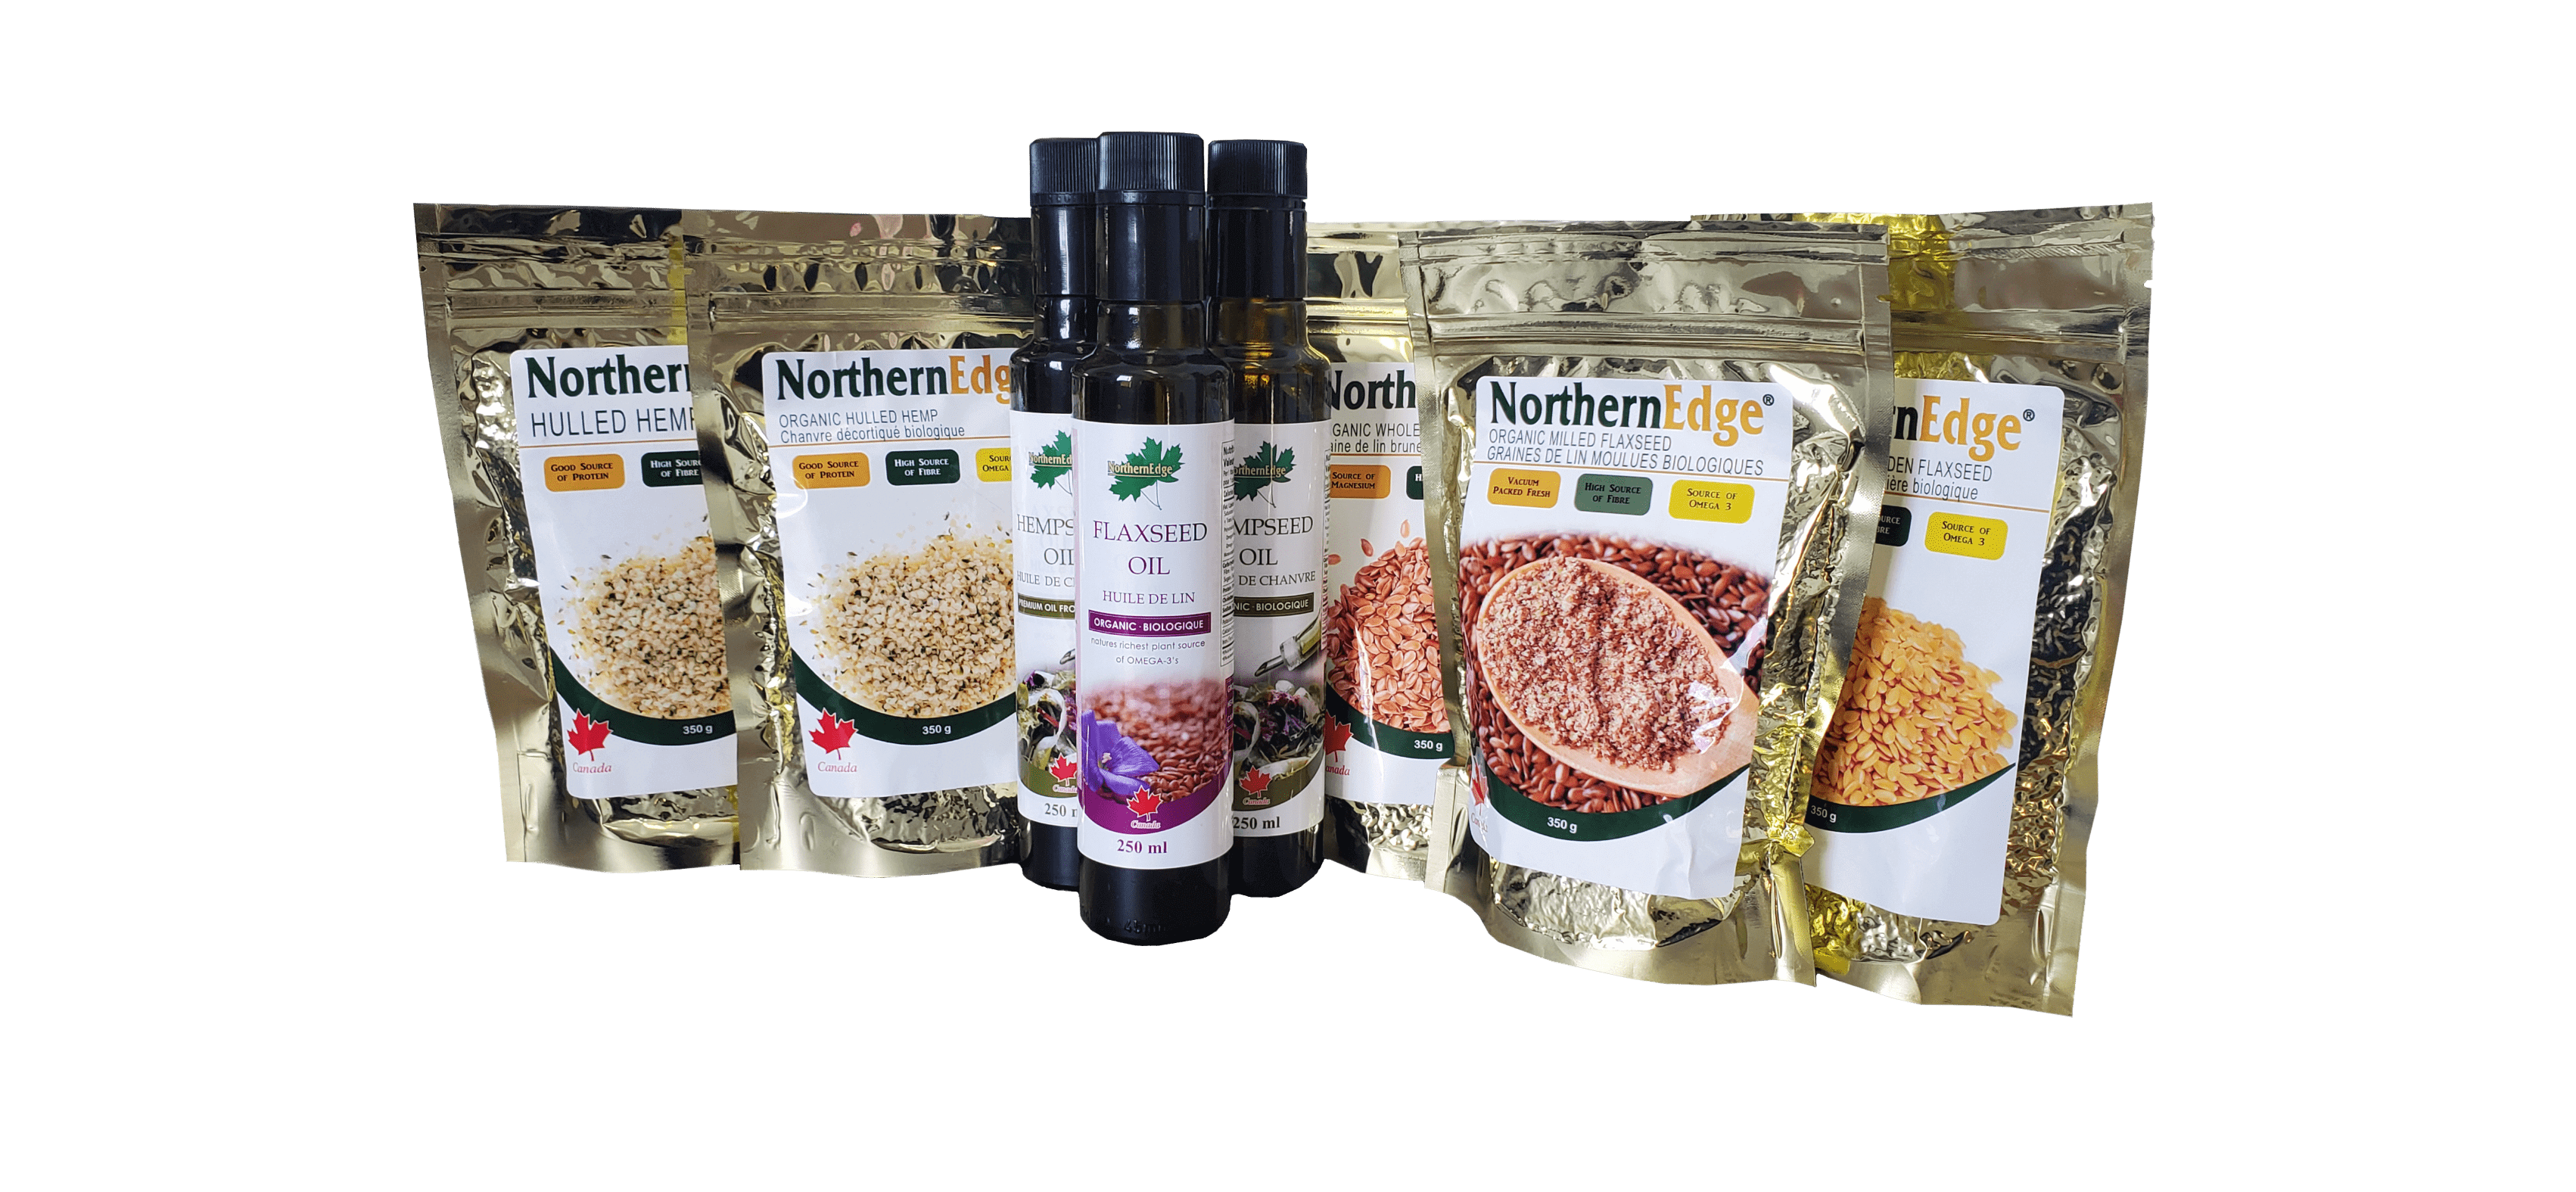 Northern Nutraceuticals Inc. Organic Hemp Seed and Flax Seed and flaxseed milled, whole, ground, hearts, and oil